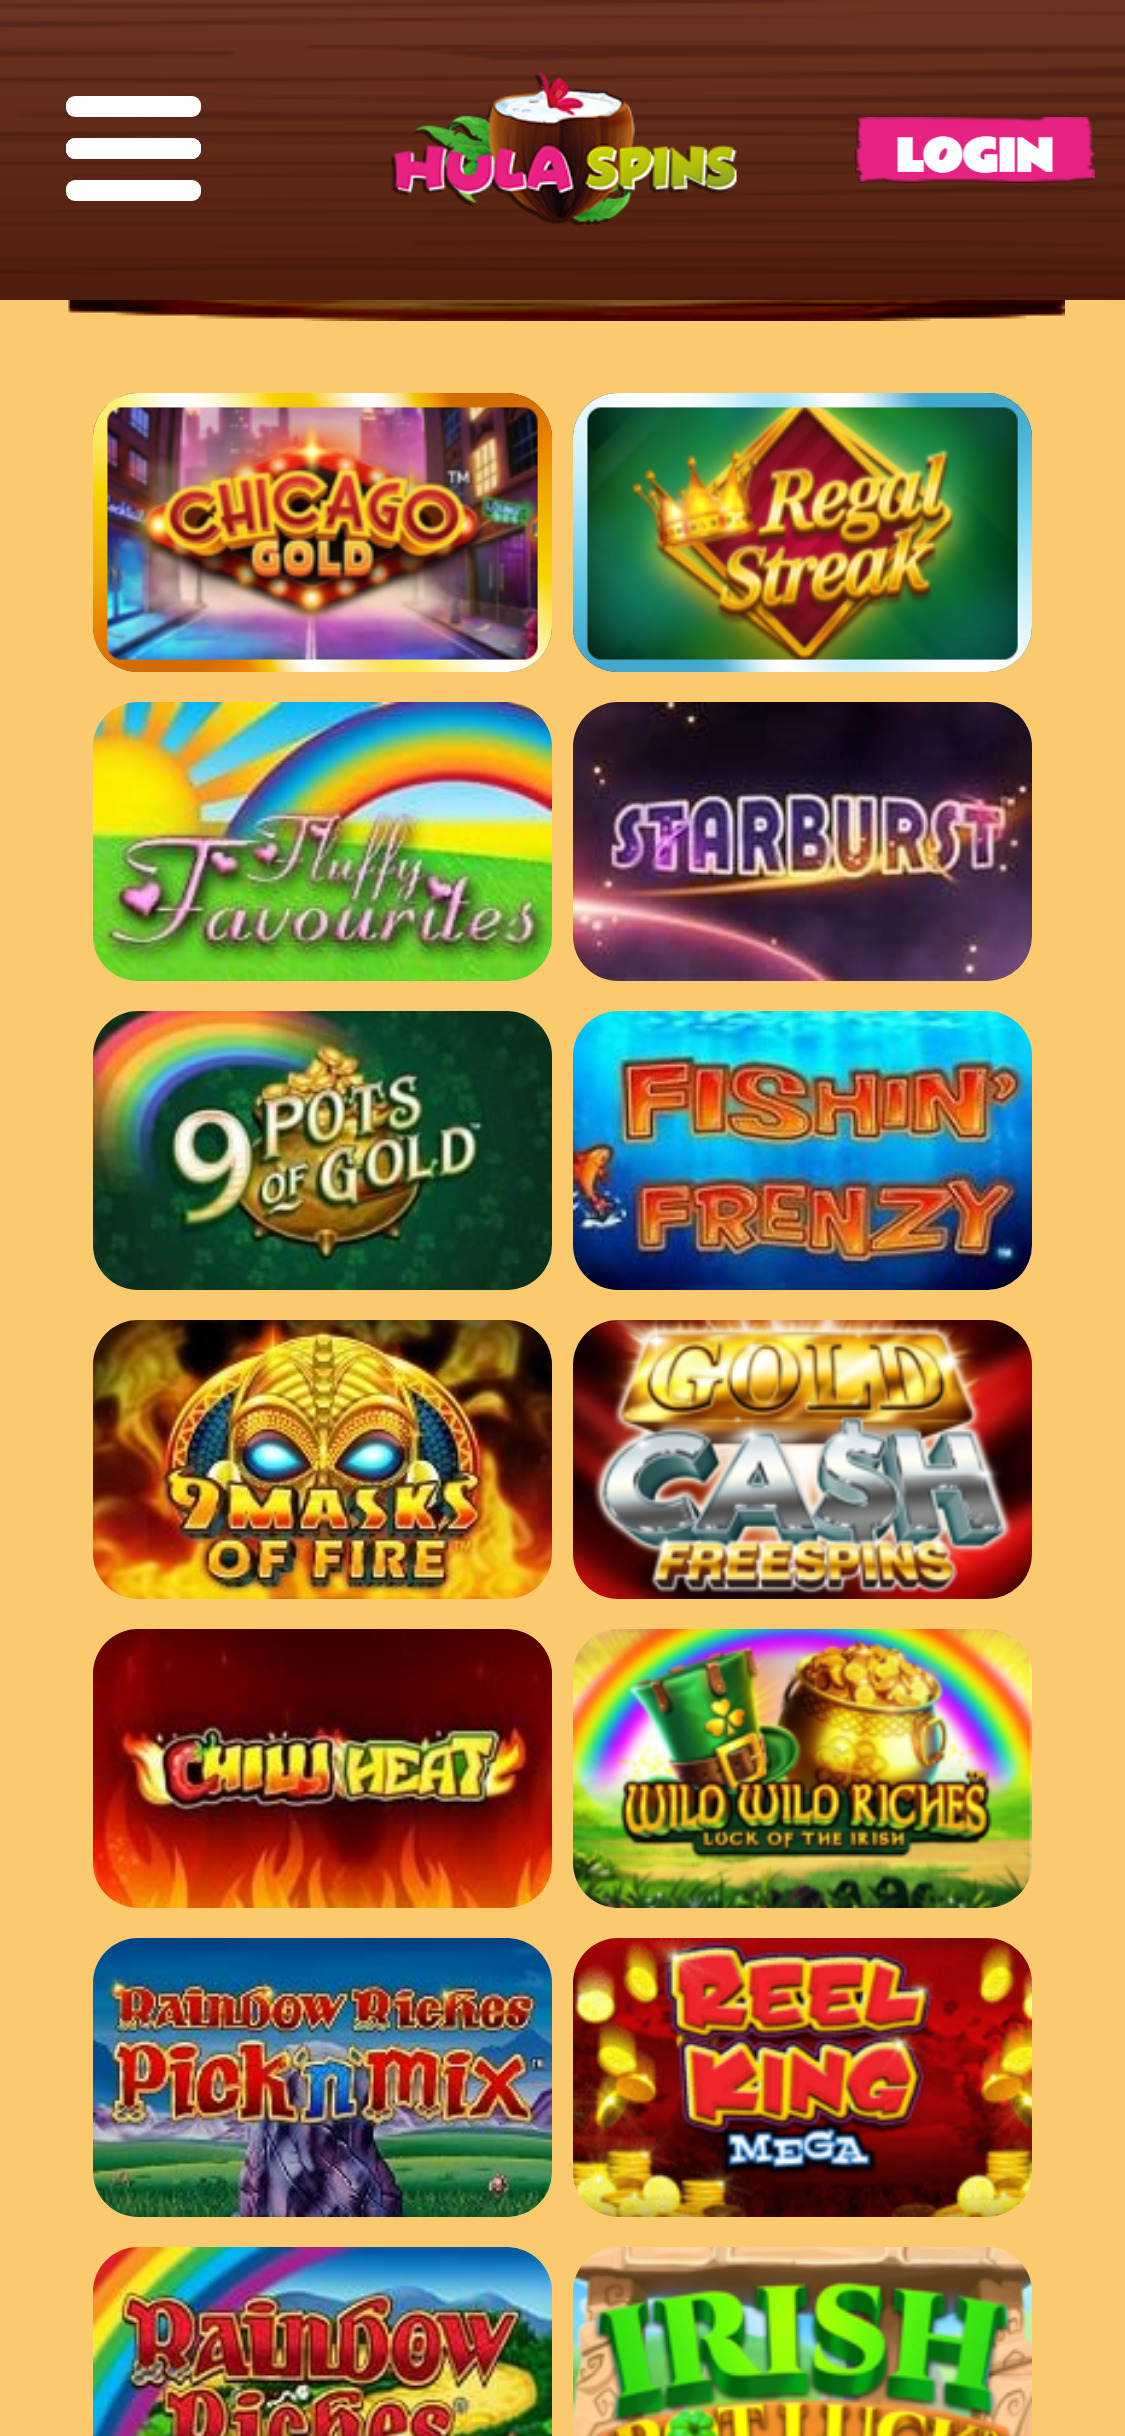 Hula Spins Casino Mobile Games Review